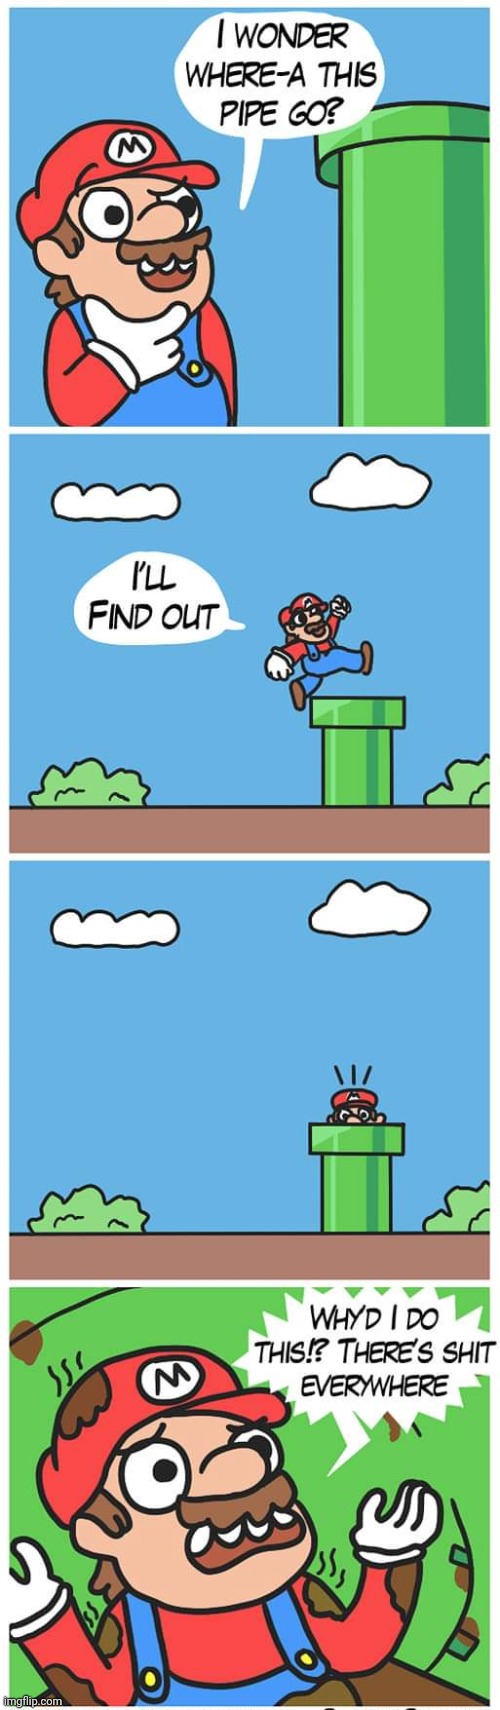 THAT'S WHAT REALLY HAPPENS | image tagged in super mario bros,comics/cartoons | made w/ Imgflip meme maker